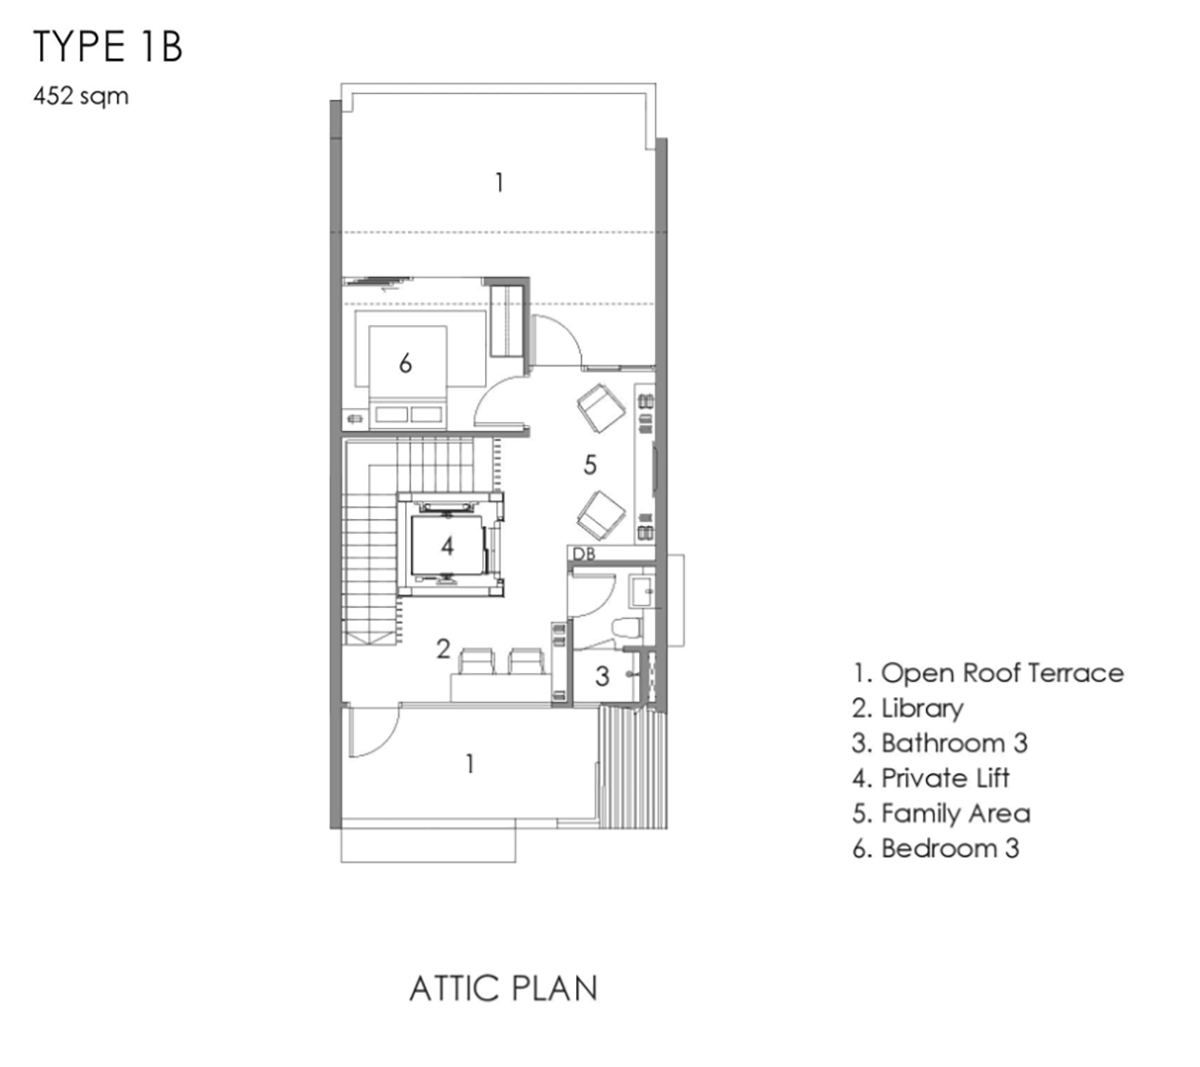 parkwood-collection-type-1b-floor-plan-attic.png